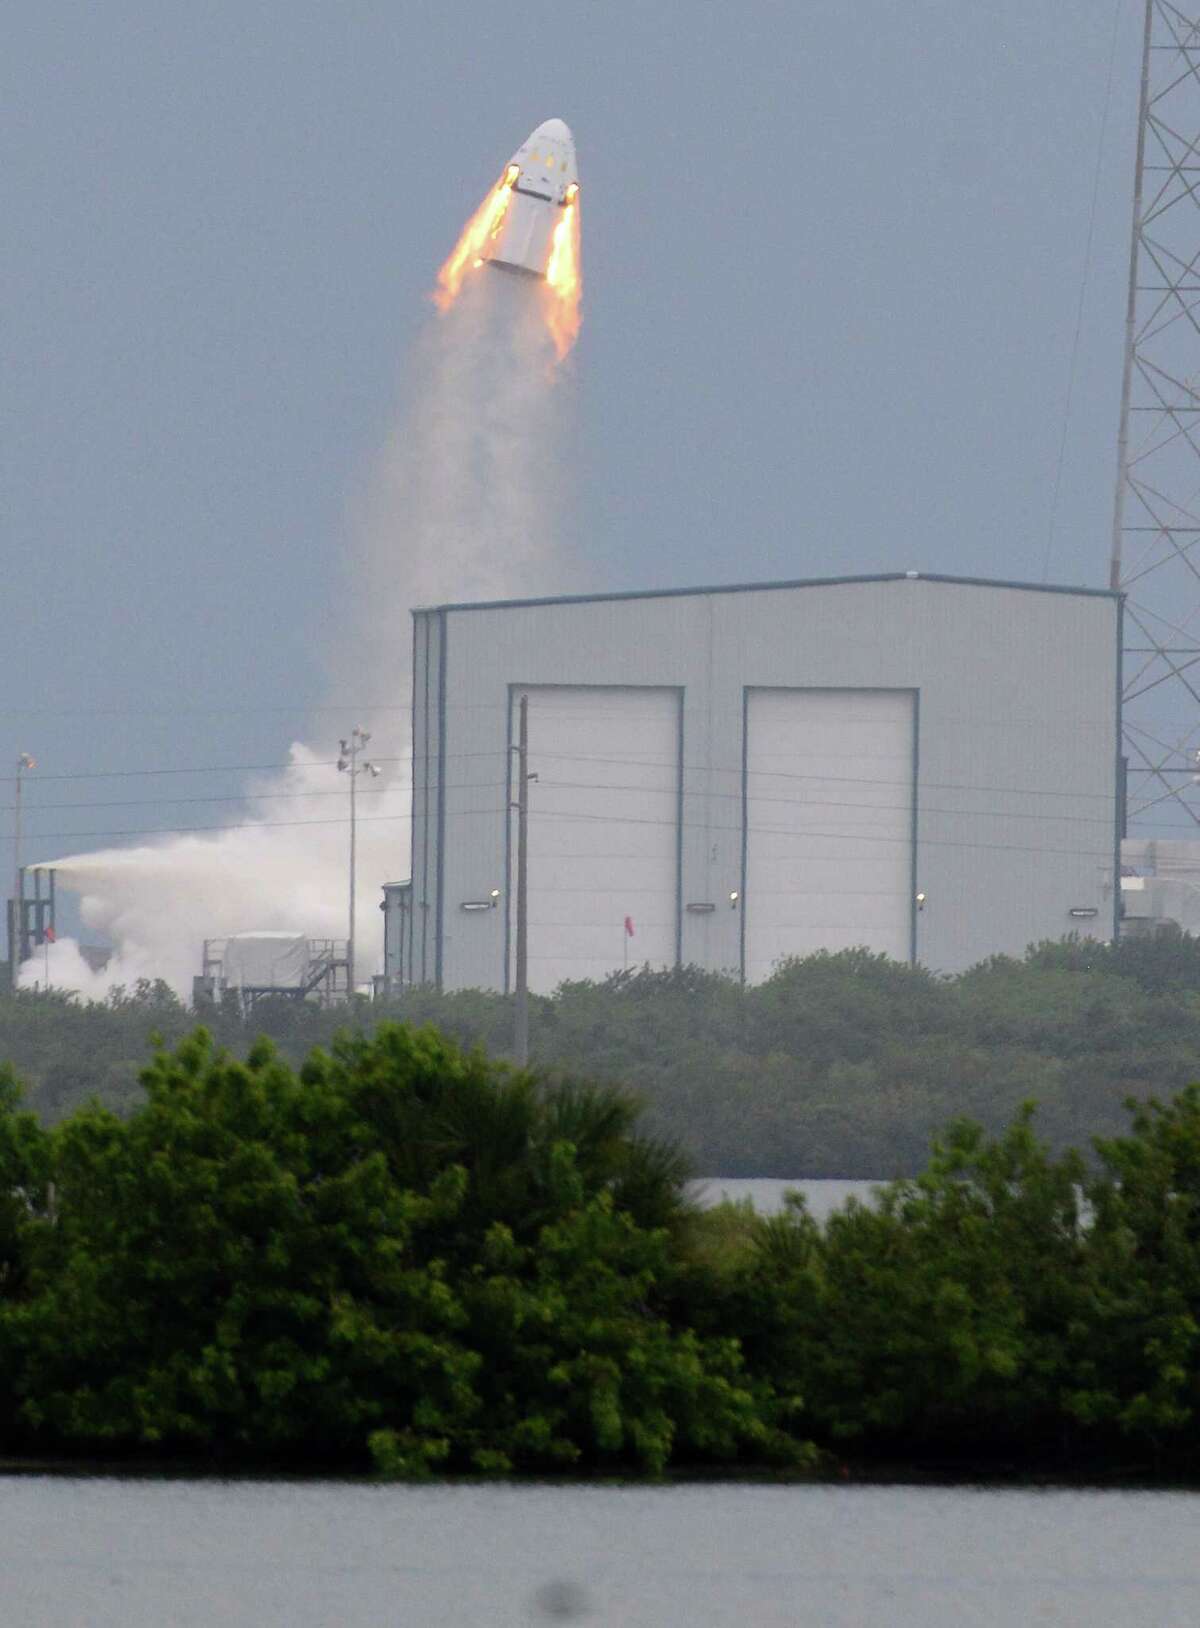 A SpaceX Dragon mock-up capsule blasts into the air, Wednesday, May 6, 2015 during a test flight in Cape Canaveral, Fla. The unmanned flight was testing a new, super-streamlined launch escape system for astronauts. The California-based company led by billionaire Elon Musk aims to launch U.S. astronauts to the International Space Station as early as 2017. (Craig Bailey/Florida Today via AP) NO SALES, MAGS OUT